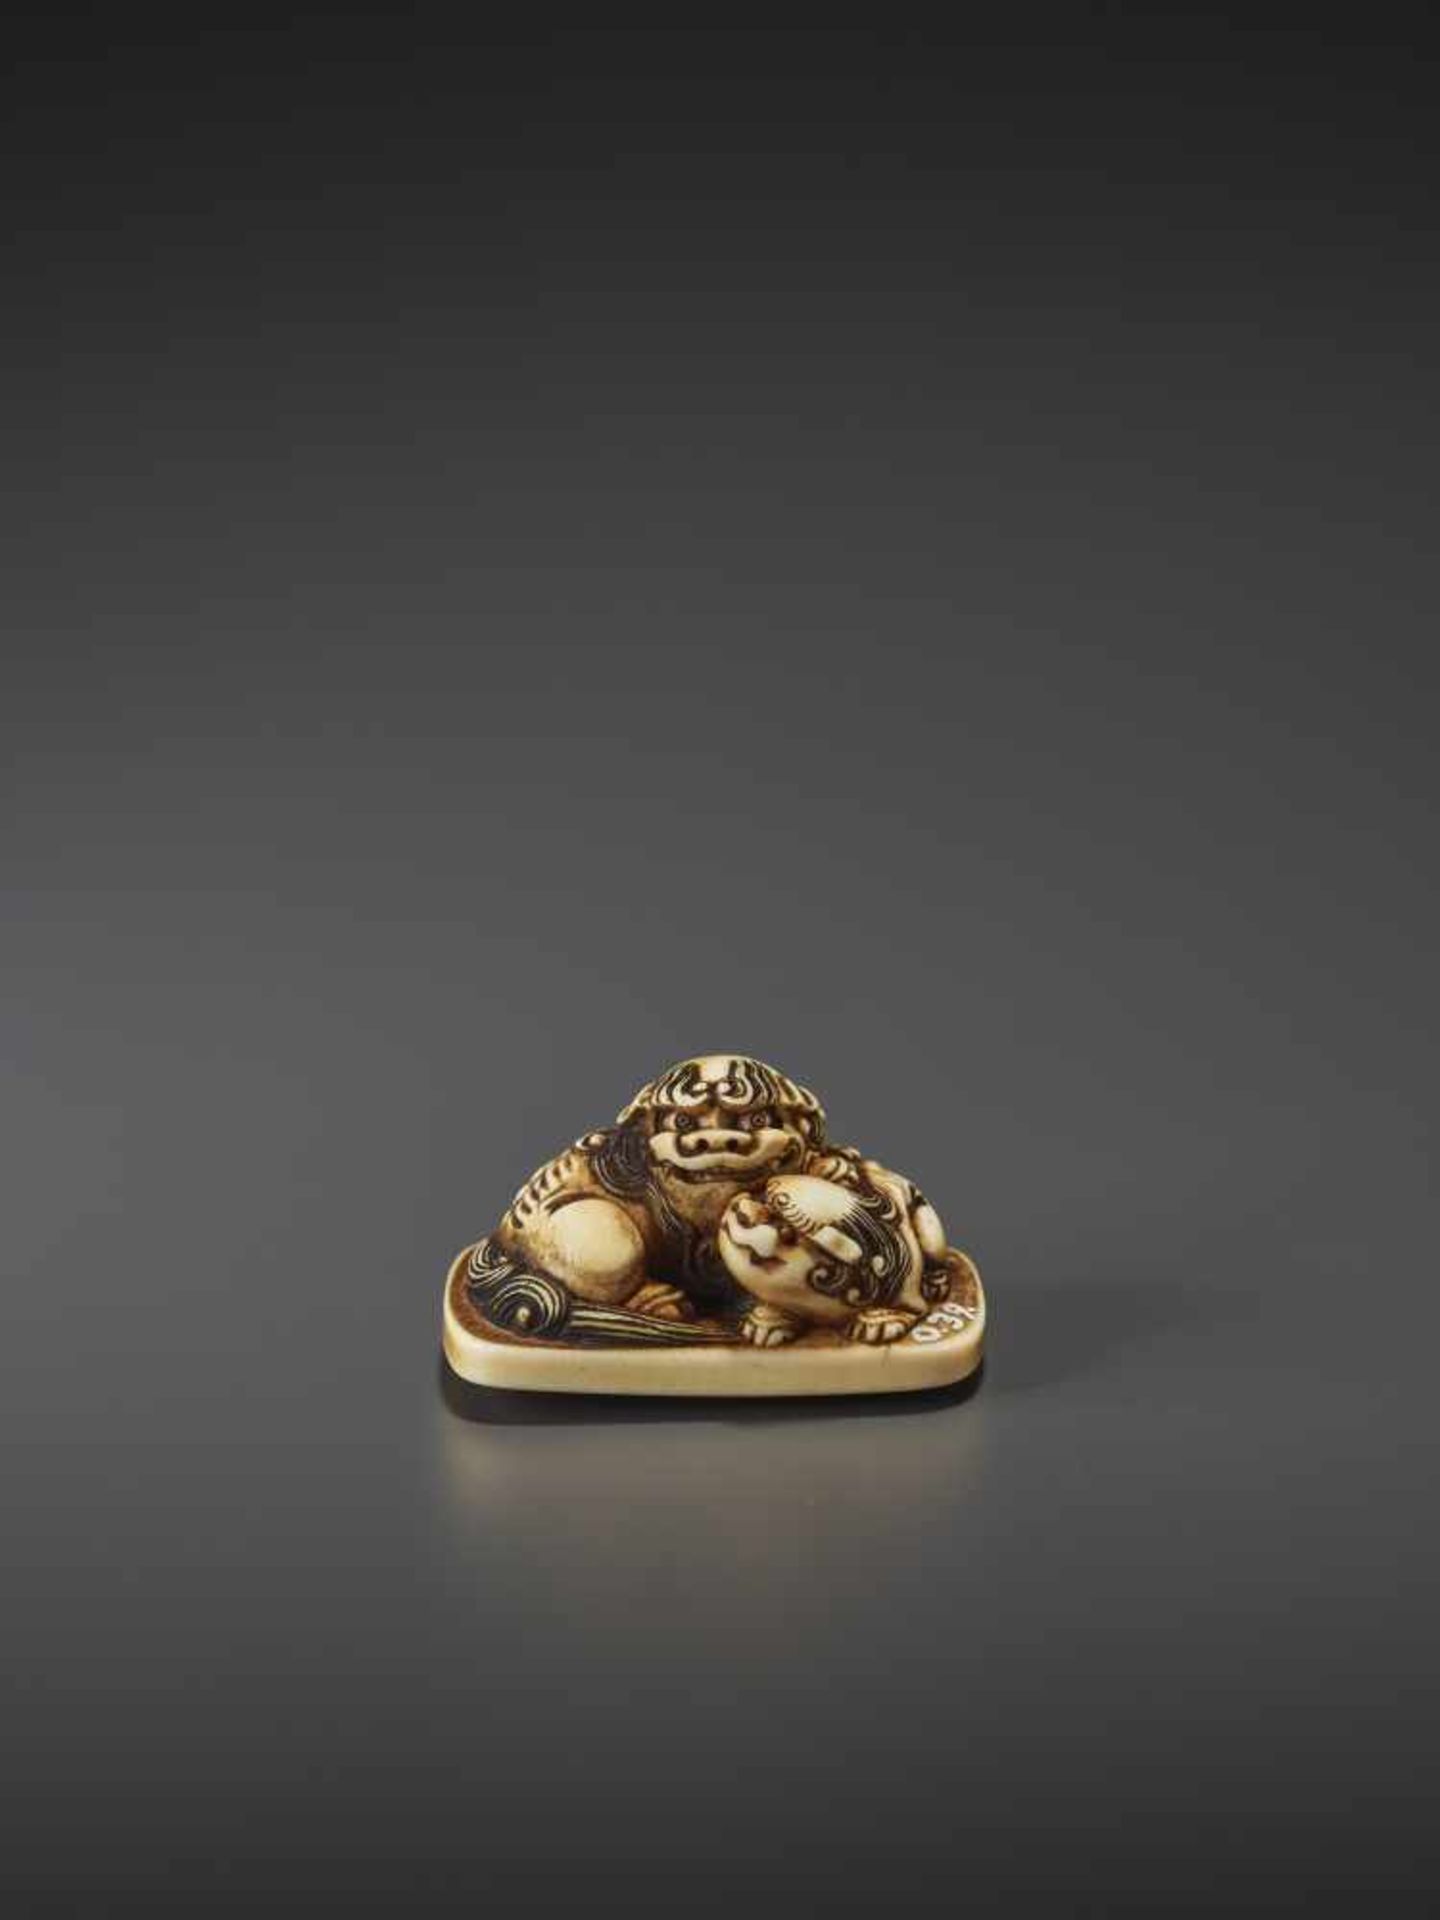 A FINE IVORY NETSUKE OF A SHISHI AND CUB IN THE MANNER OF RENSAI Unsigned, in the manner of